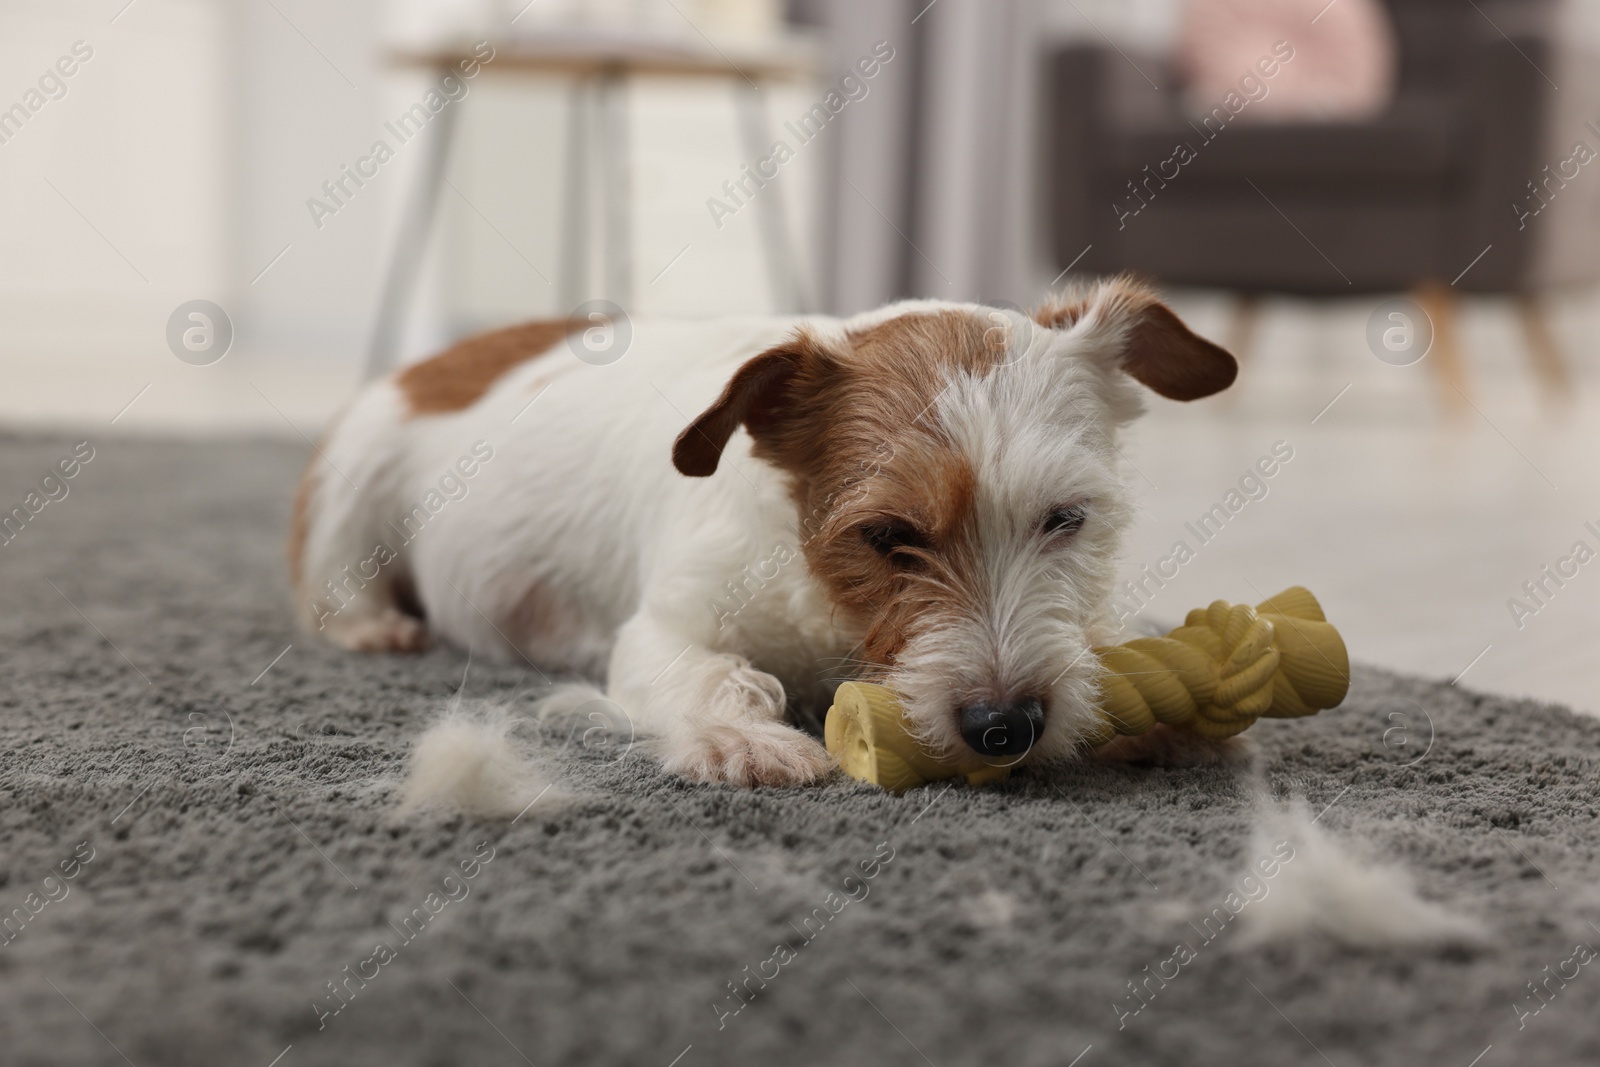 Photo of Cute dog playing with toy on carpet with pet hair at home